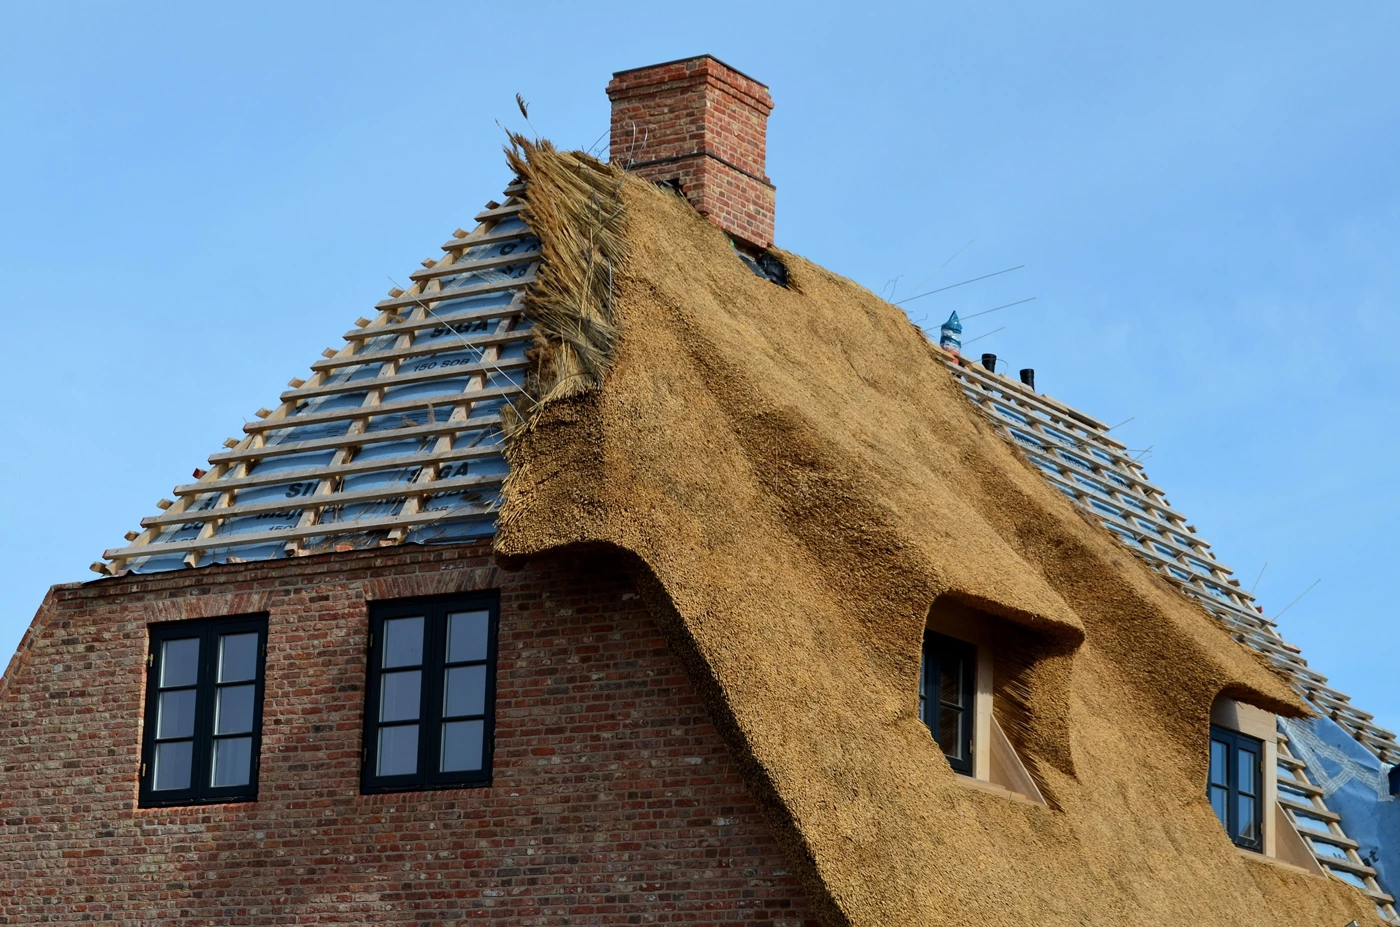 A half finished thatch roof project